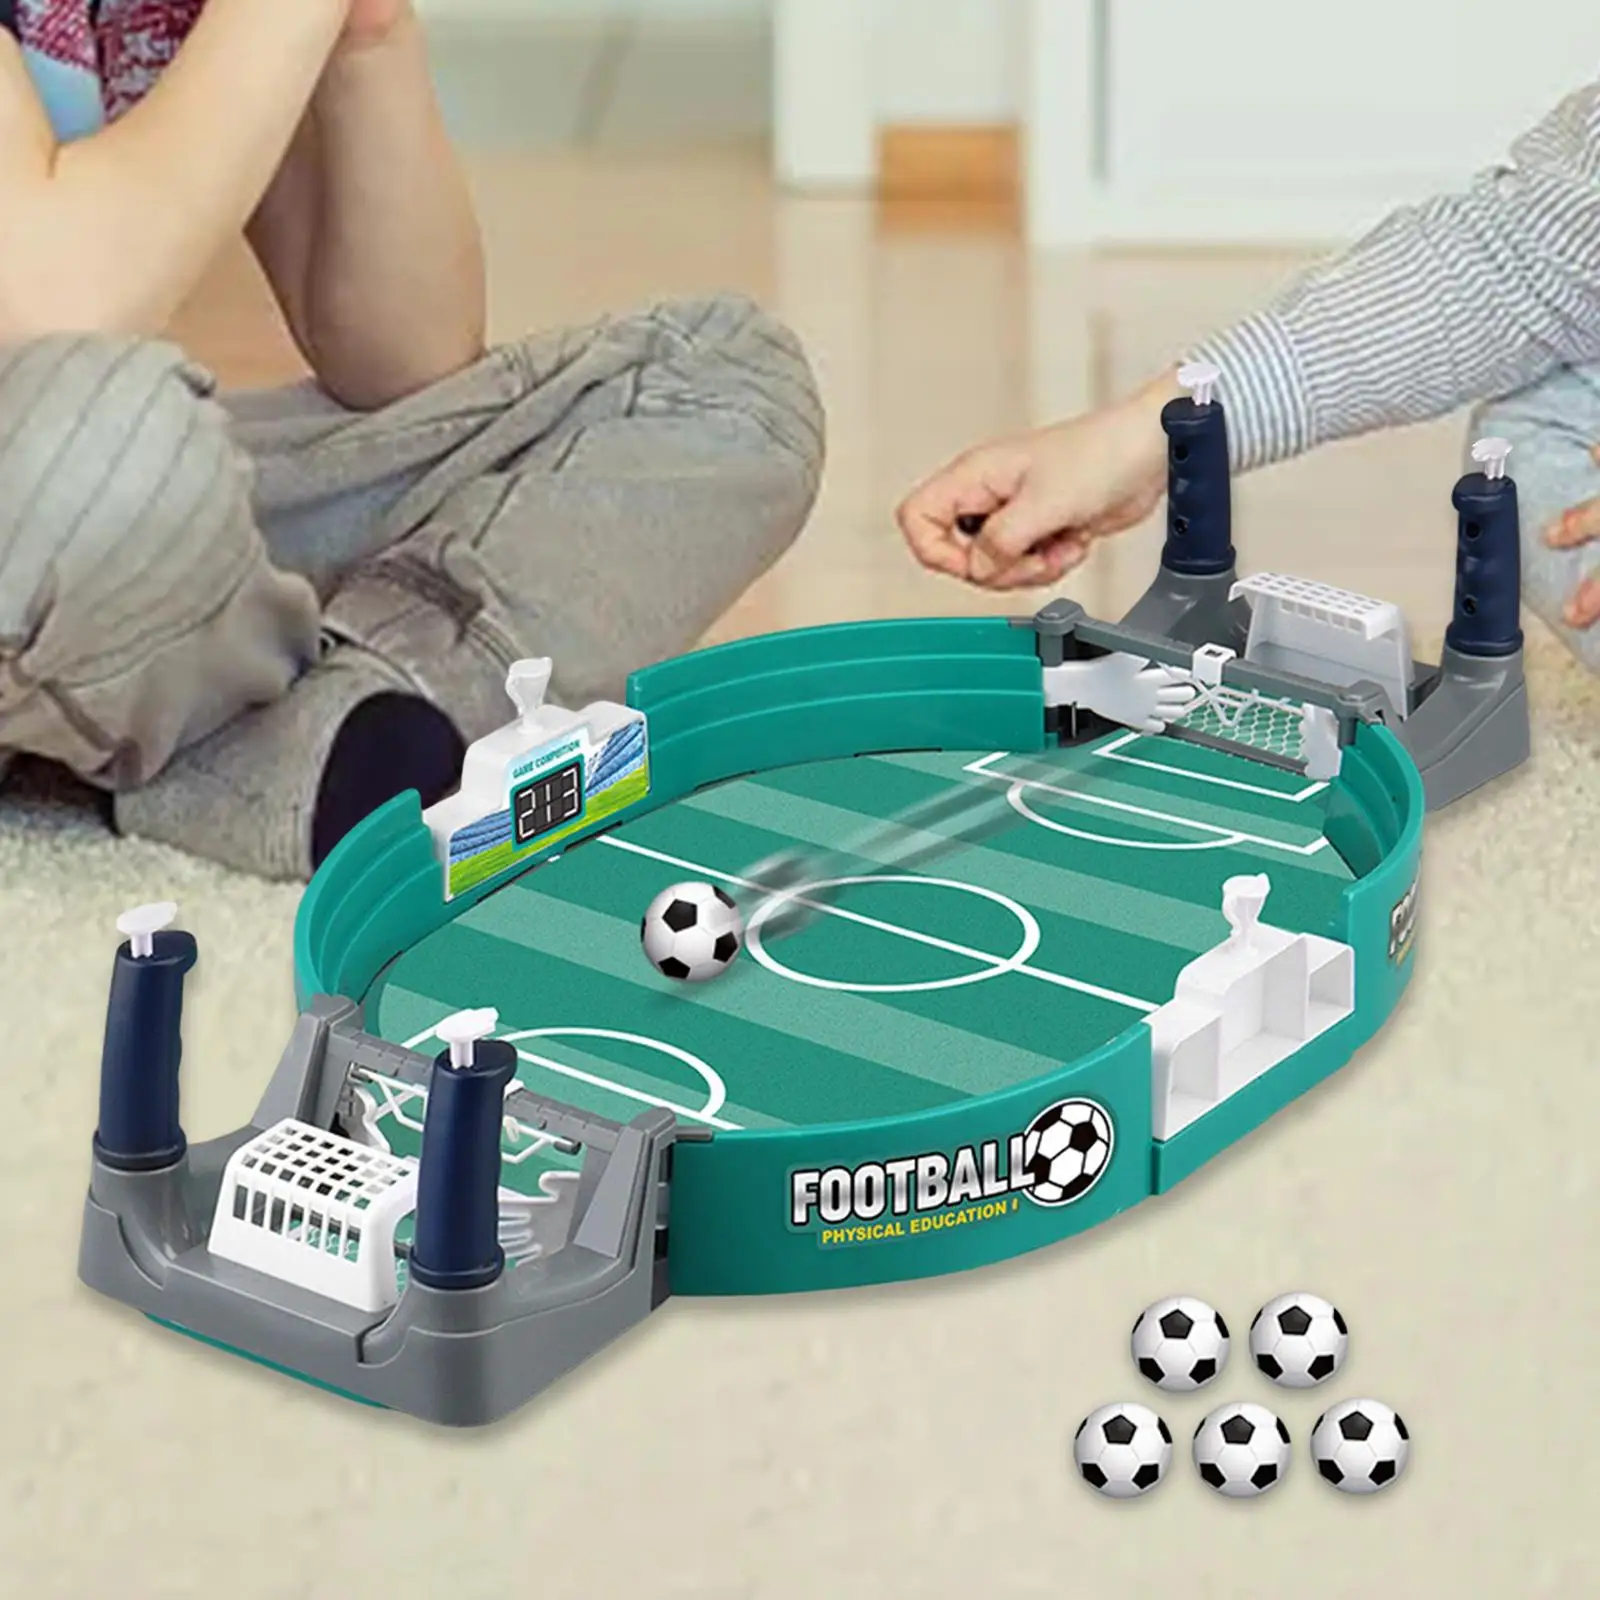 Tabletop Football Pinball Games Sport Board Soccer Football Games for Party